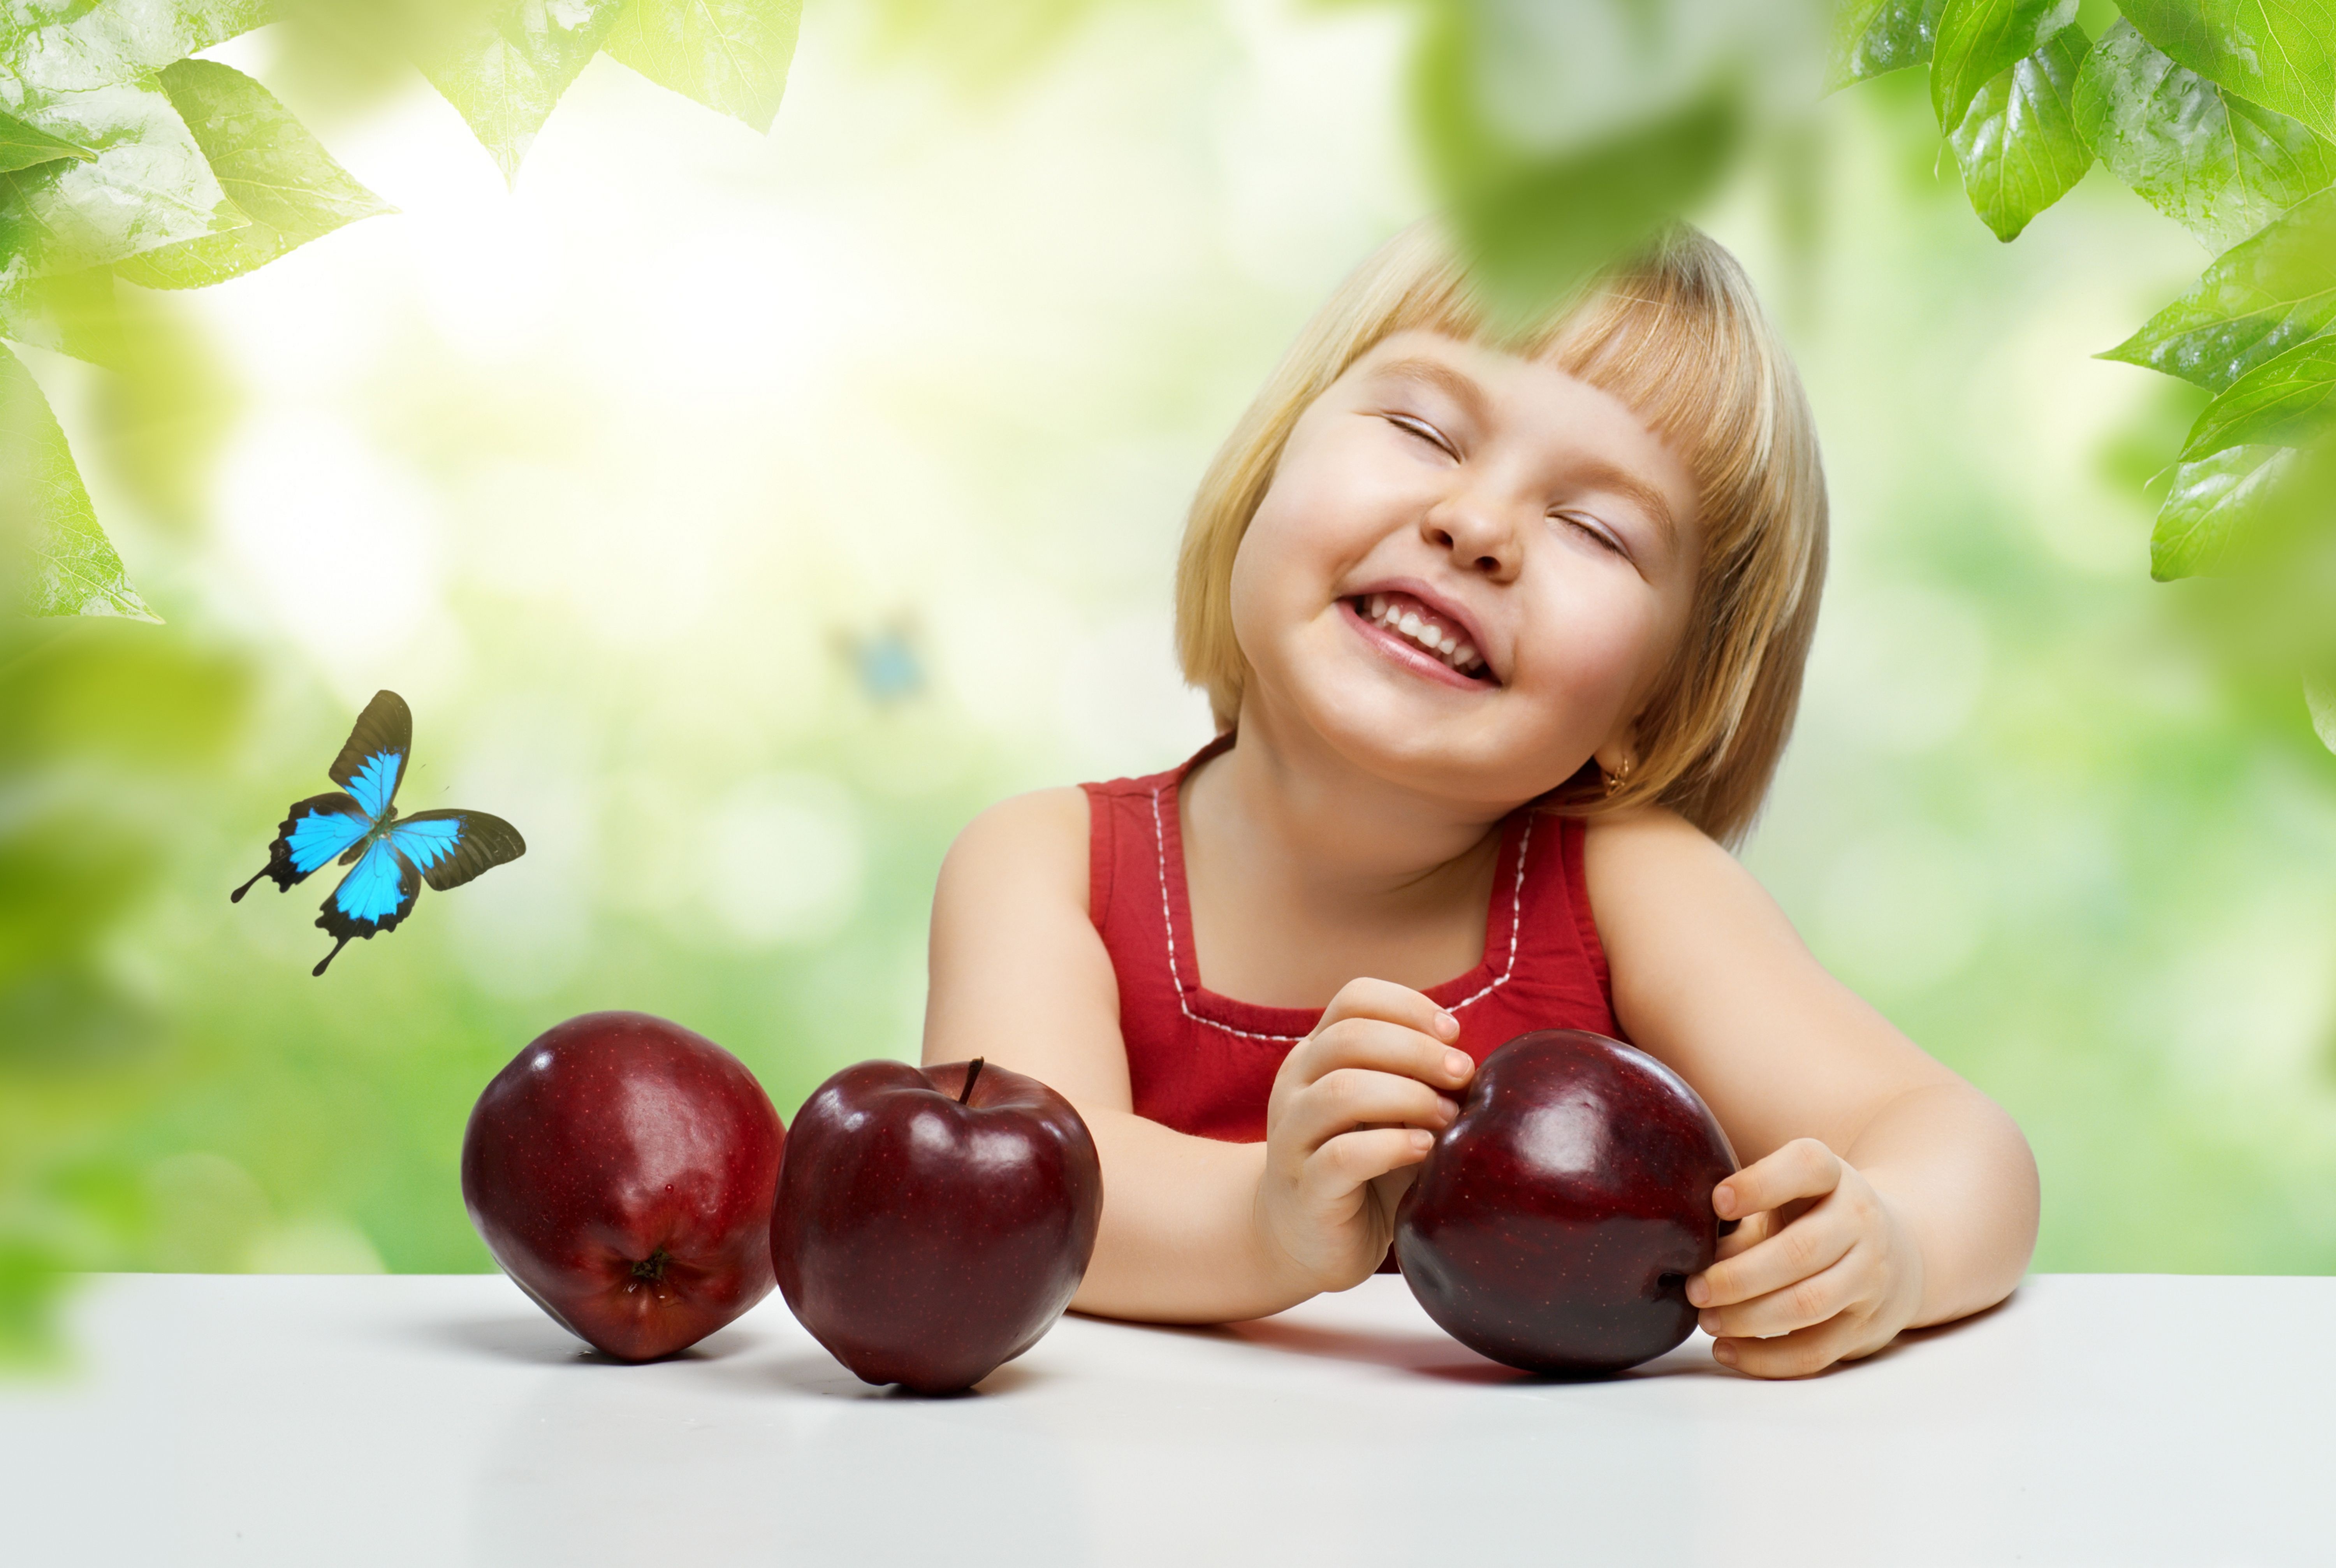 Pictures Little girls Butterflies Smile Laughter child Apples Fruit 600x402 butterfly laugh laughs Children